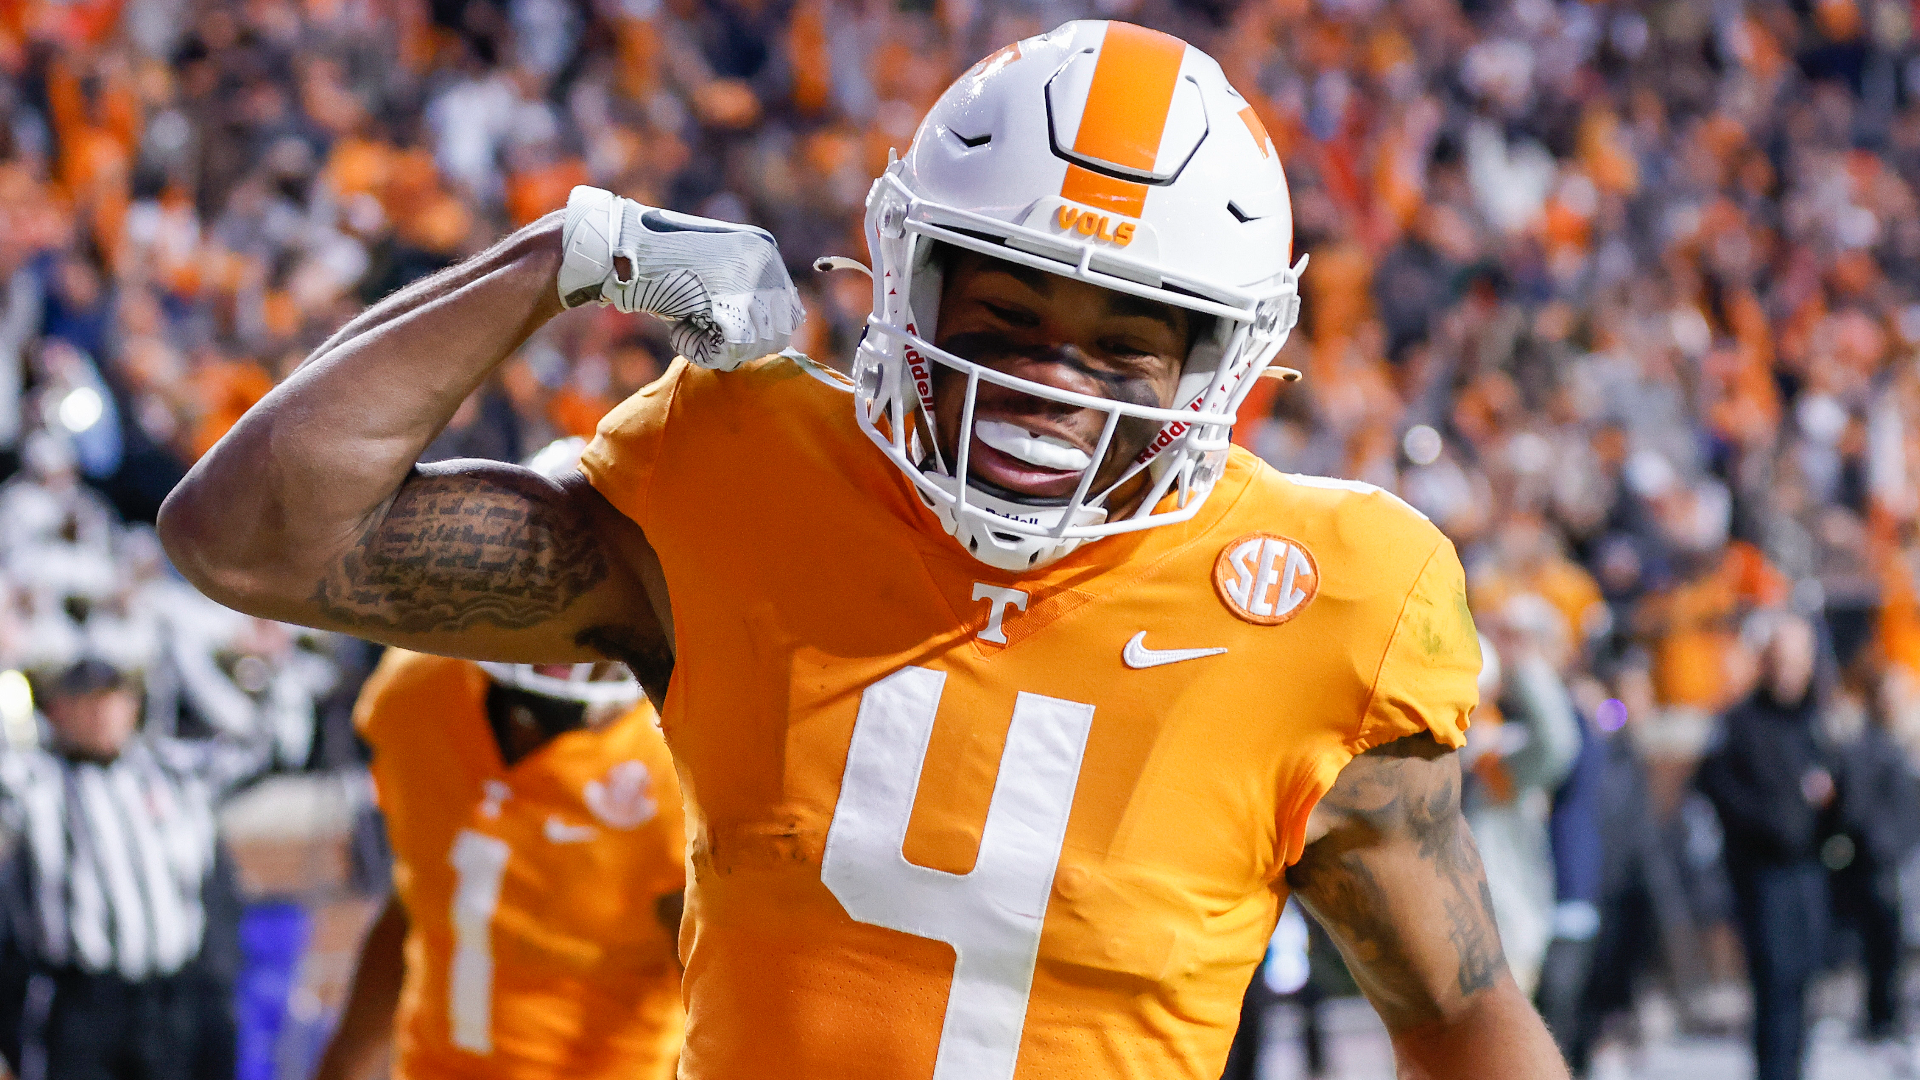 Hendon Hooker will remain Tennessee's quarterback for 2022